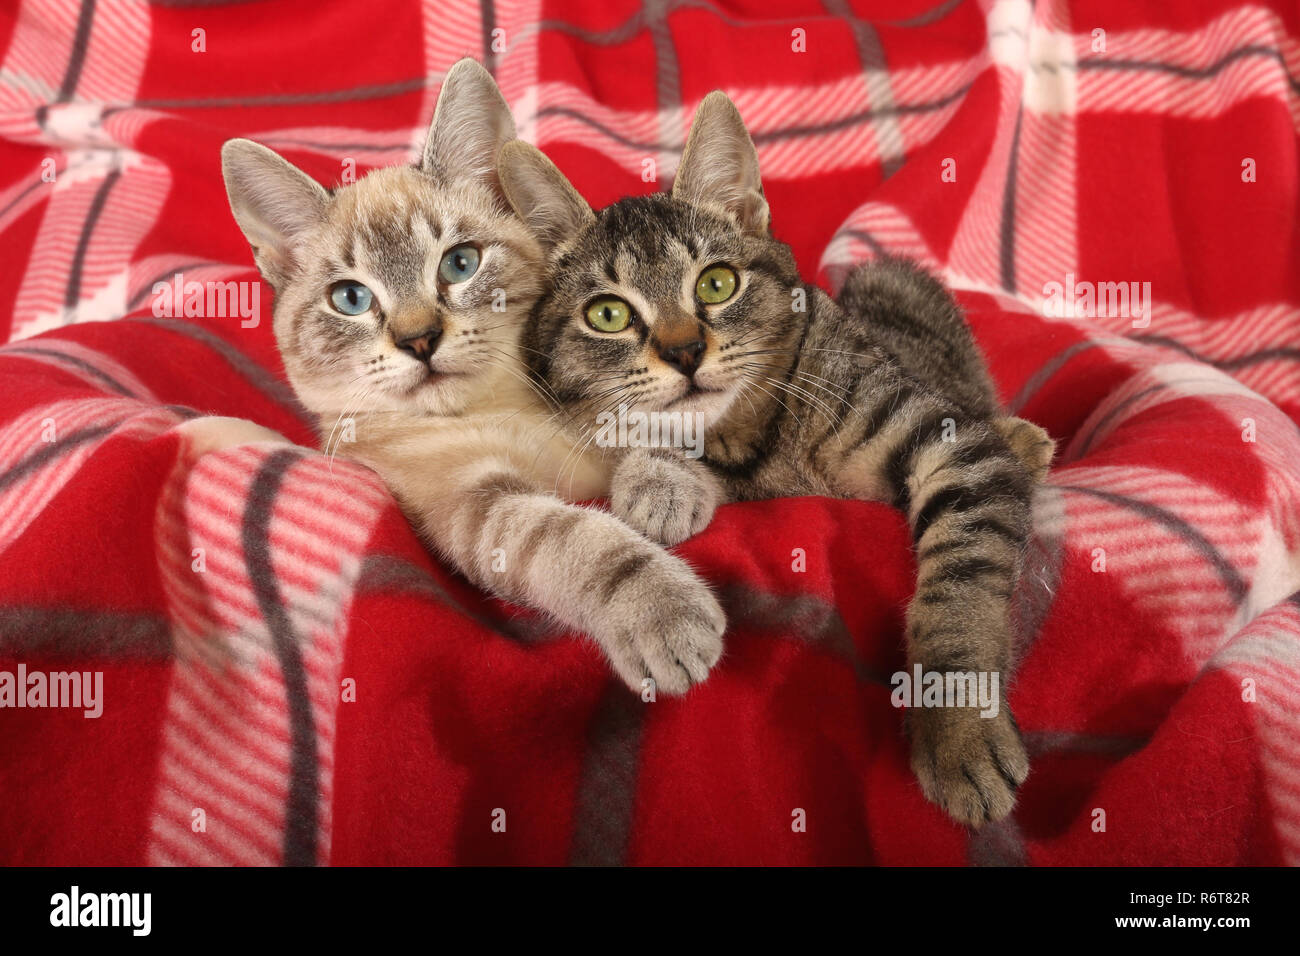 two young cats (seal tabby point and black tabby), 3 month old, lying on a red carpet Stock Photo